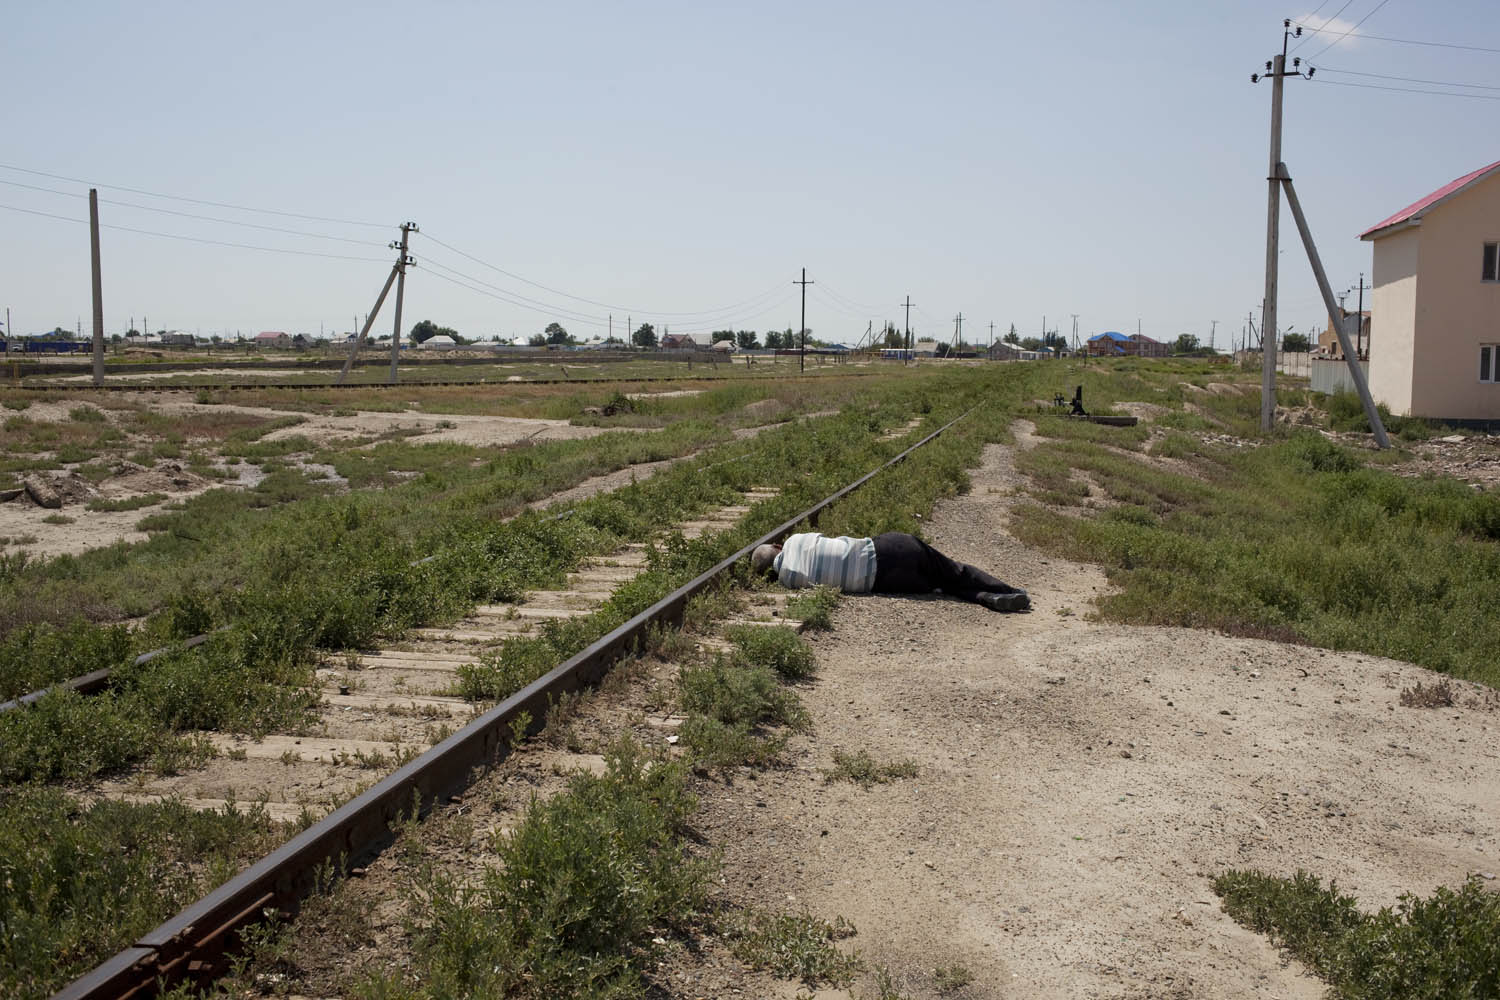 A man passed out on the train tracks near an oil refinery in Atyrau.